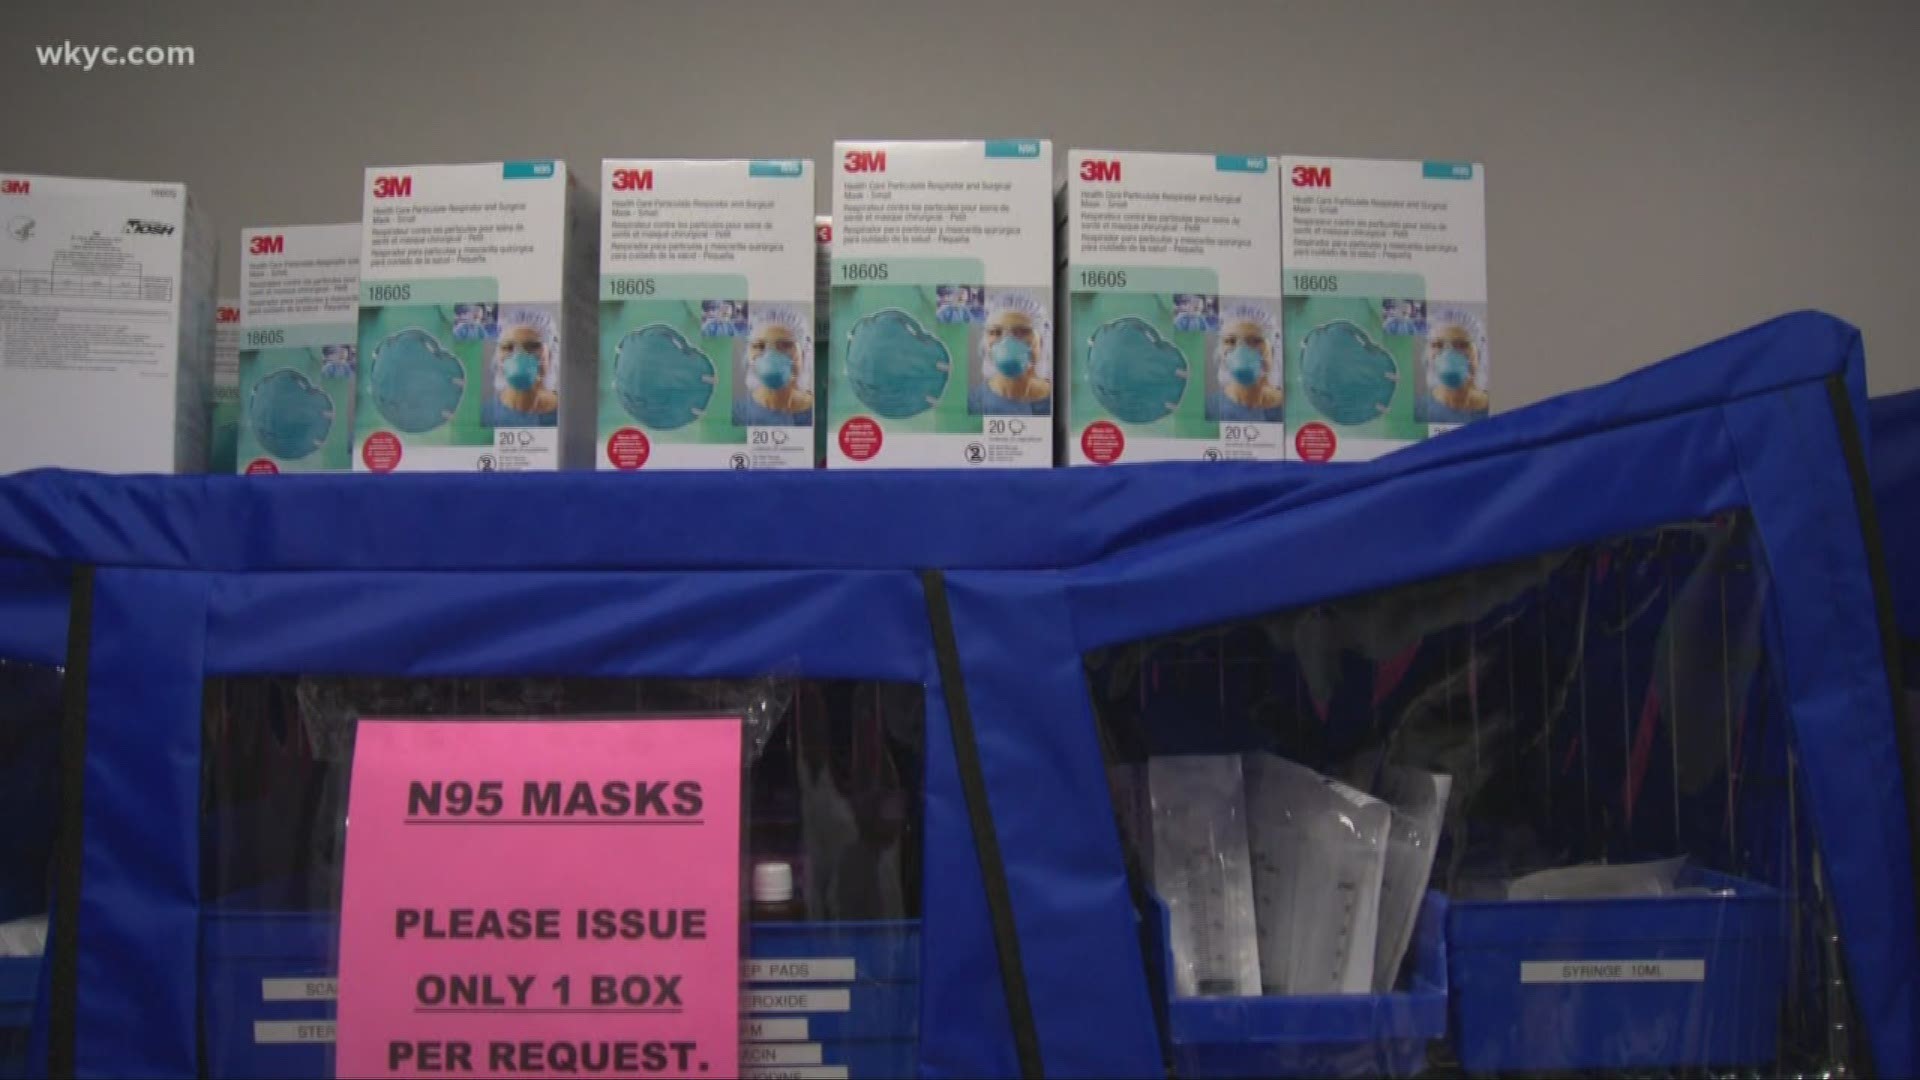 Emergency management put in a request to the state to get more masks. They were told it would take 70 days minimum.